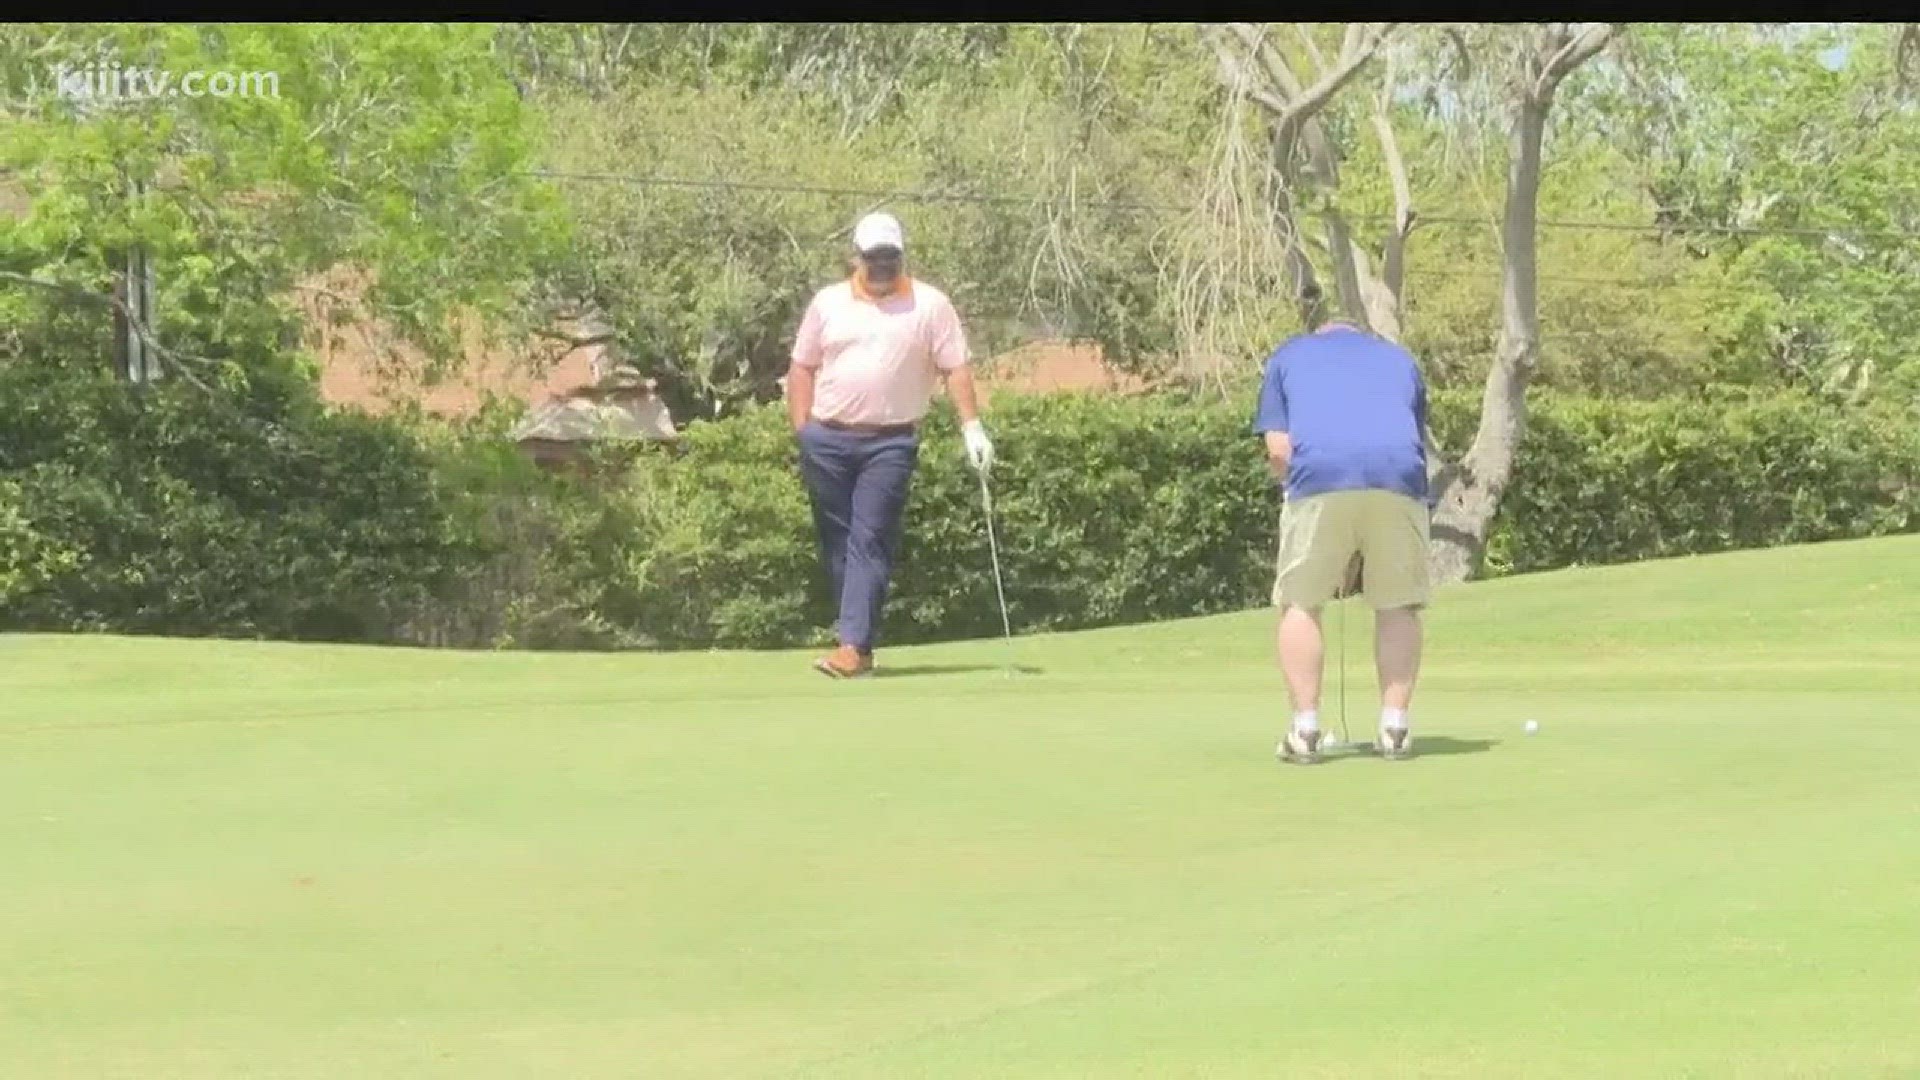 Several teams hit the links Friday in the 20th annual Tom Keeler Memorial Golf Tournament, the biggest fundraiser for the Gulf Coast Humane Society.